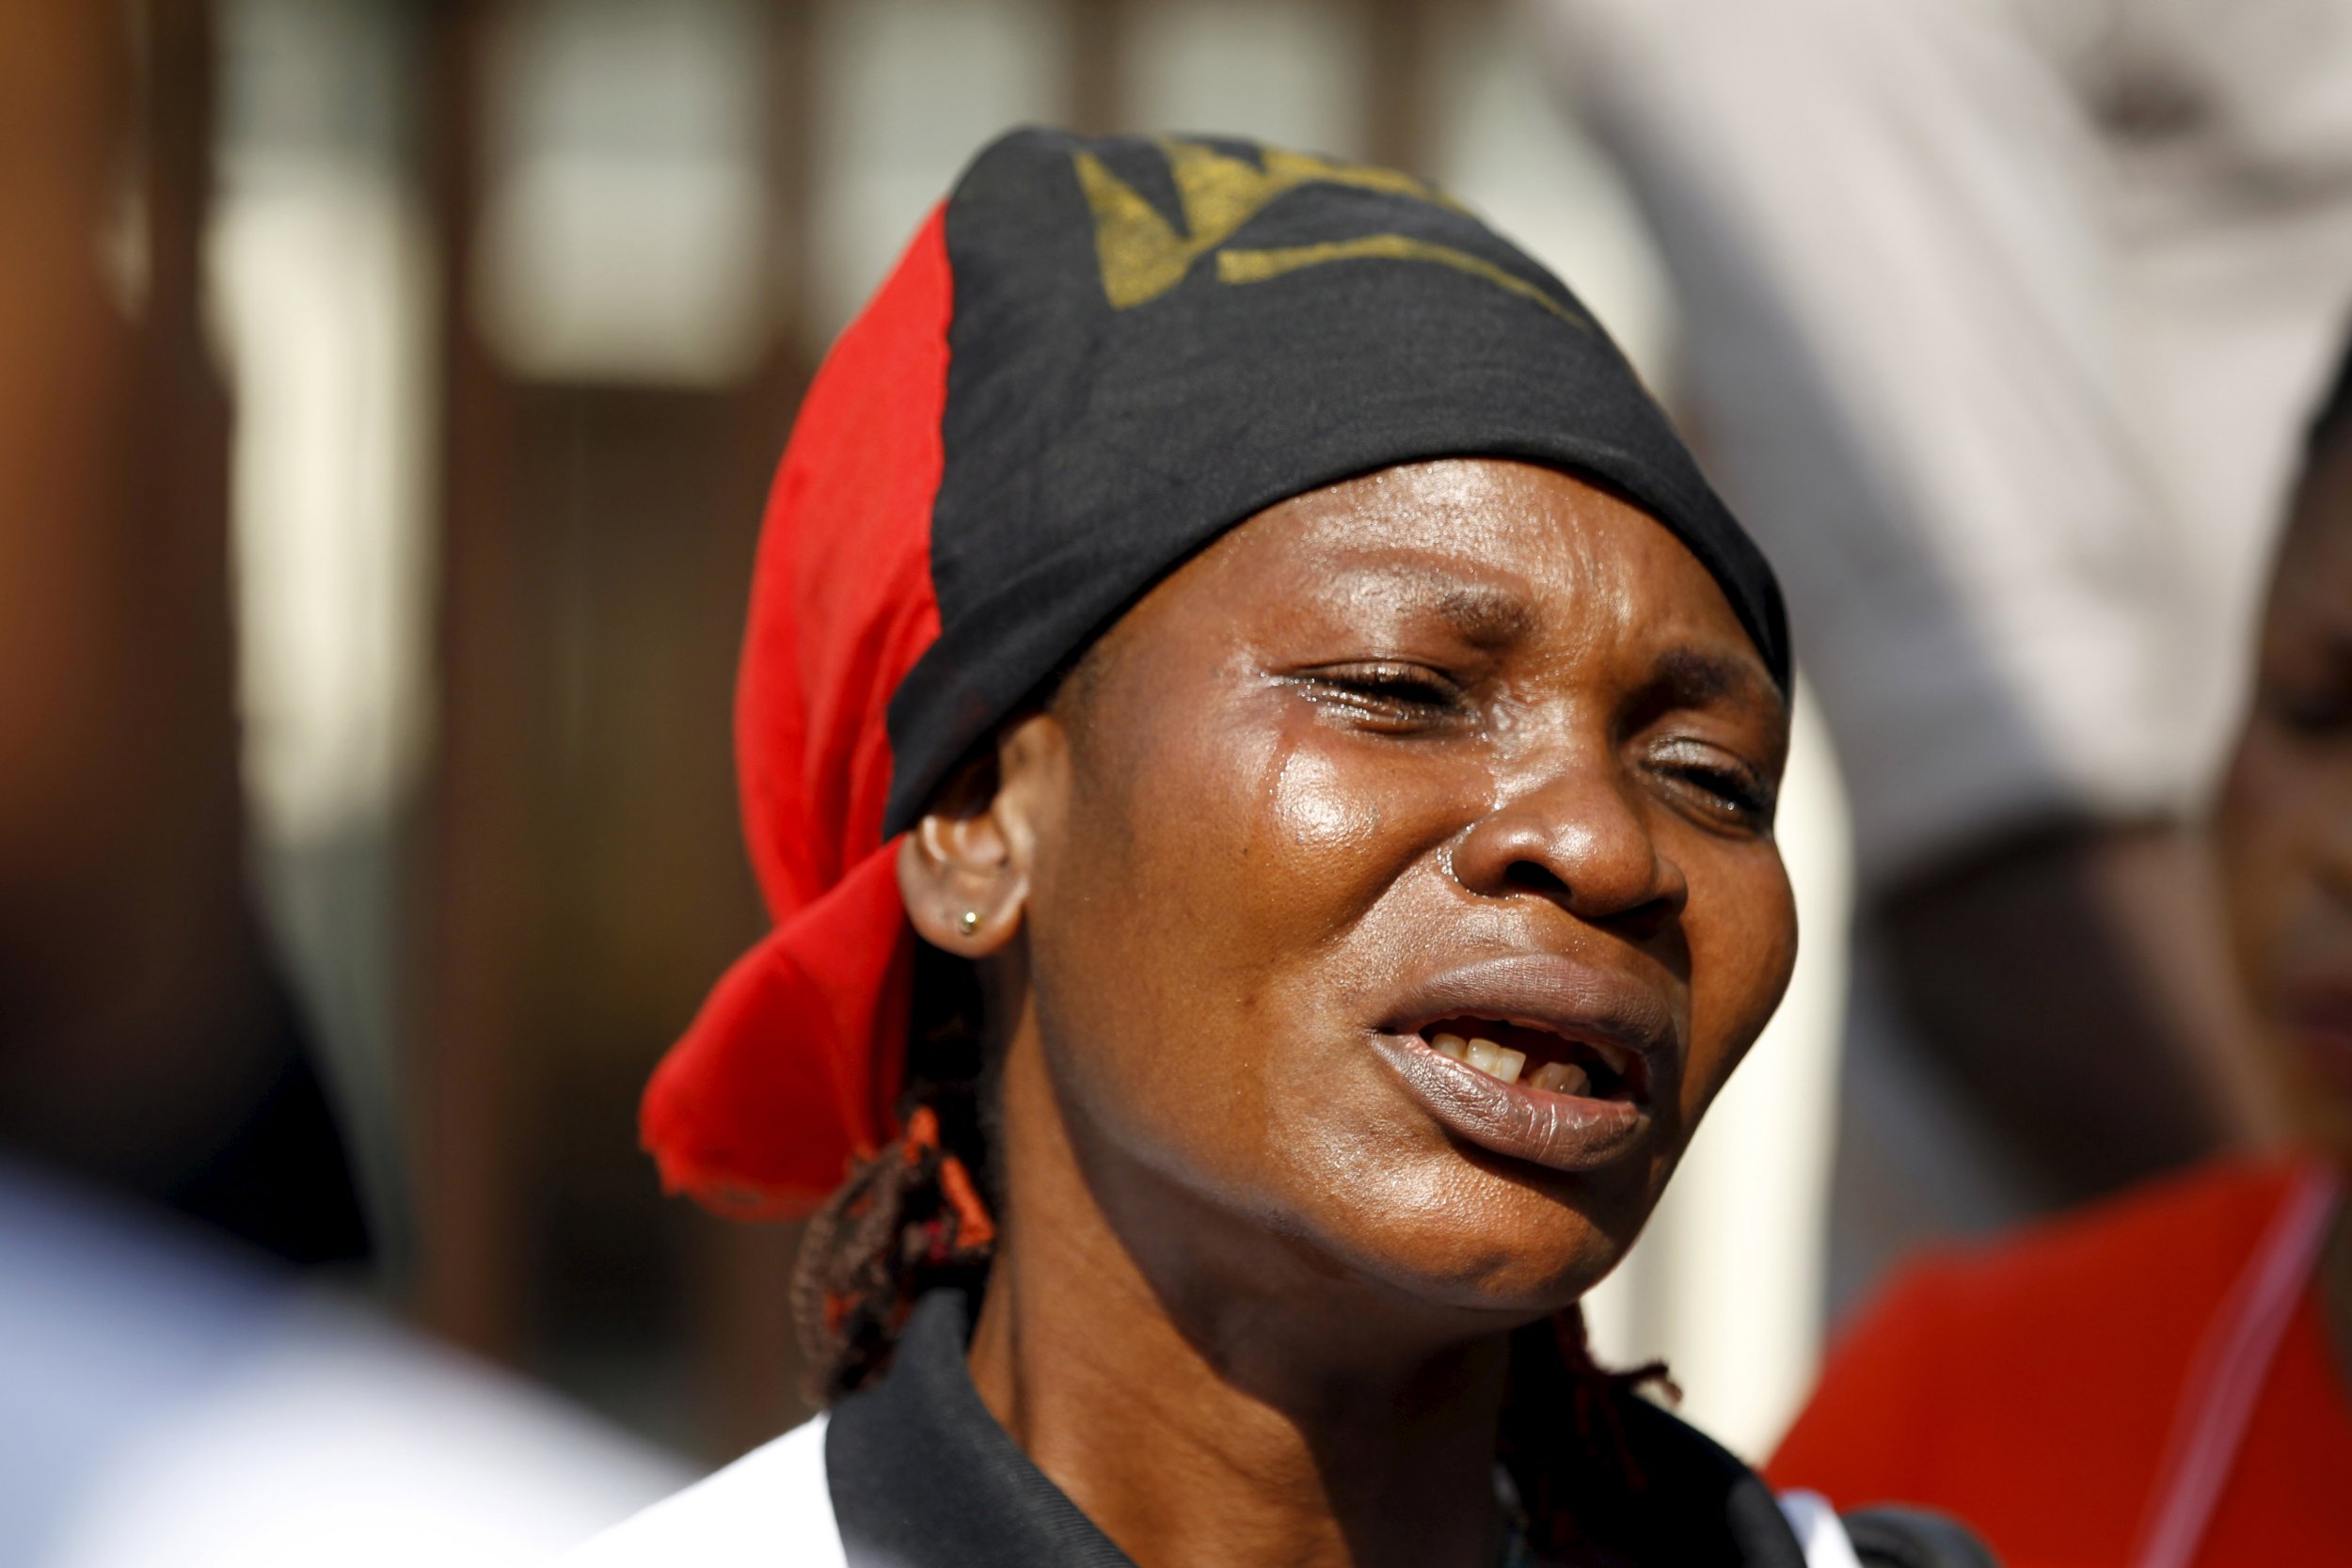 A Biafra supporter of Nnamdi Kanu cries during a rally.